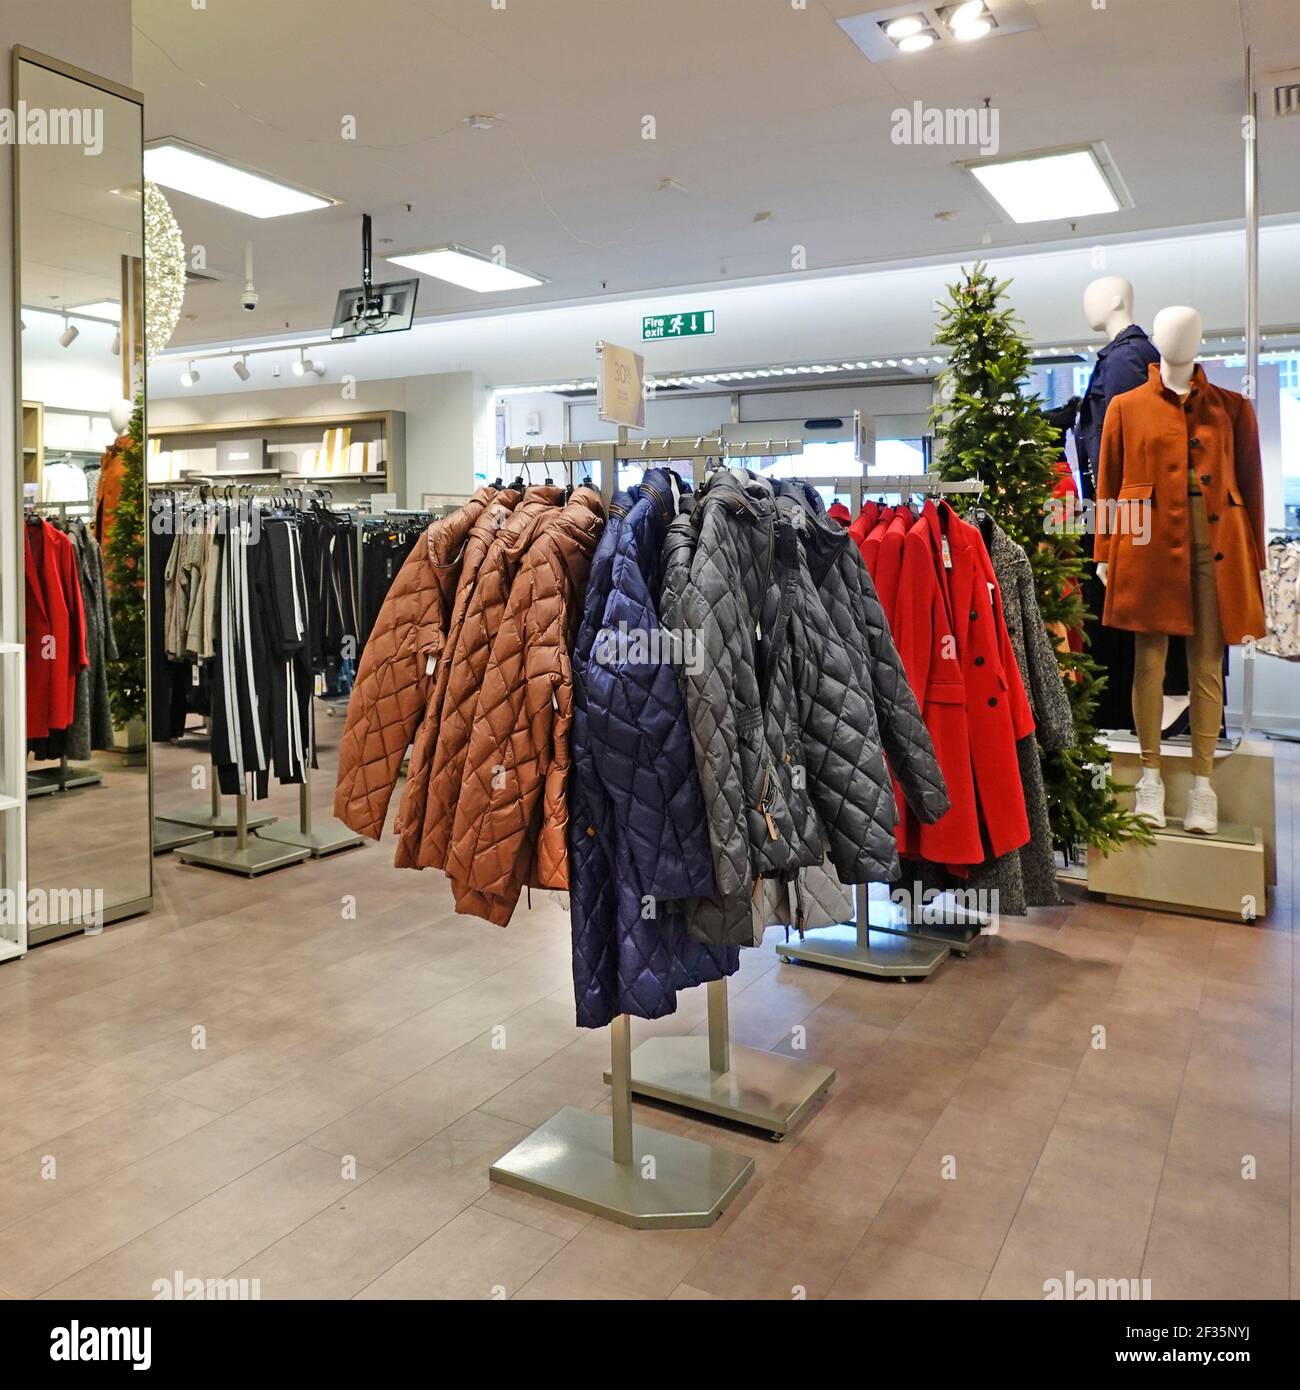 Interior view Marks and Spencer retail business store women fashion display M&S winter coats hanging on rails for inspection and purchase England UK Stock Photo